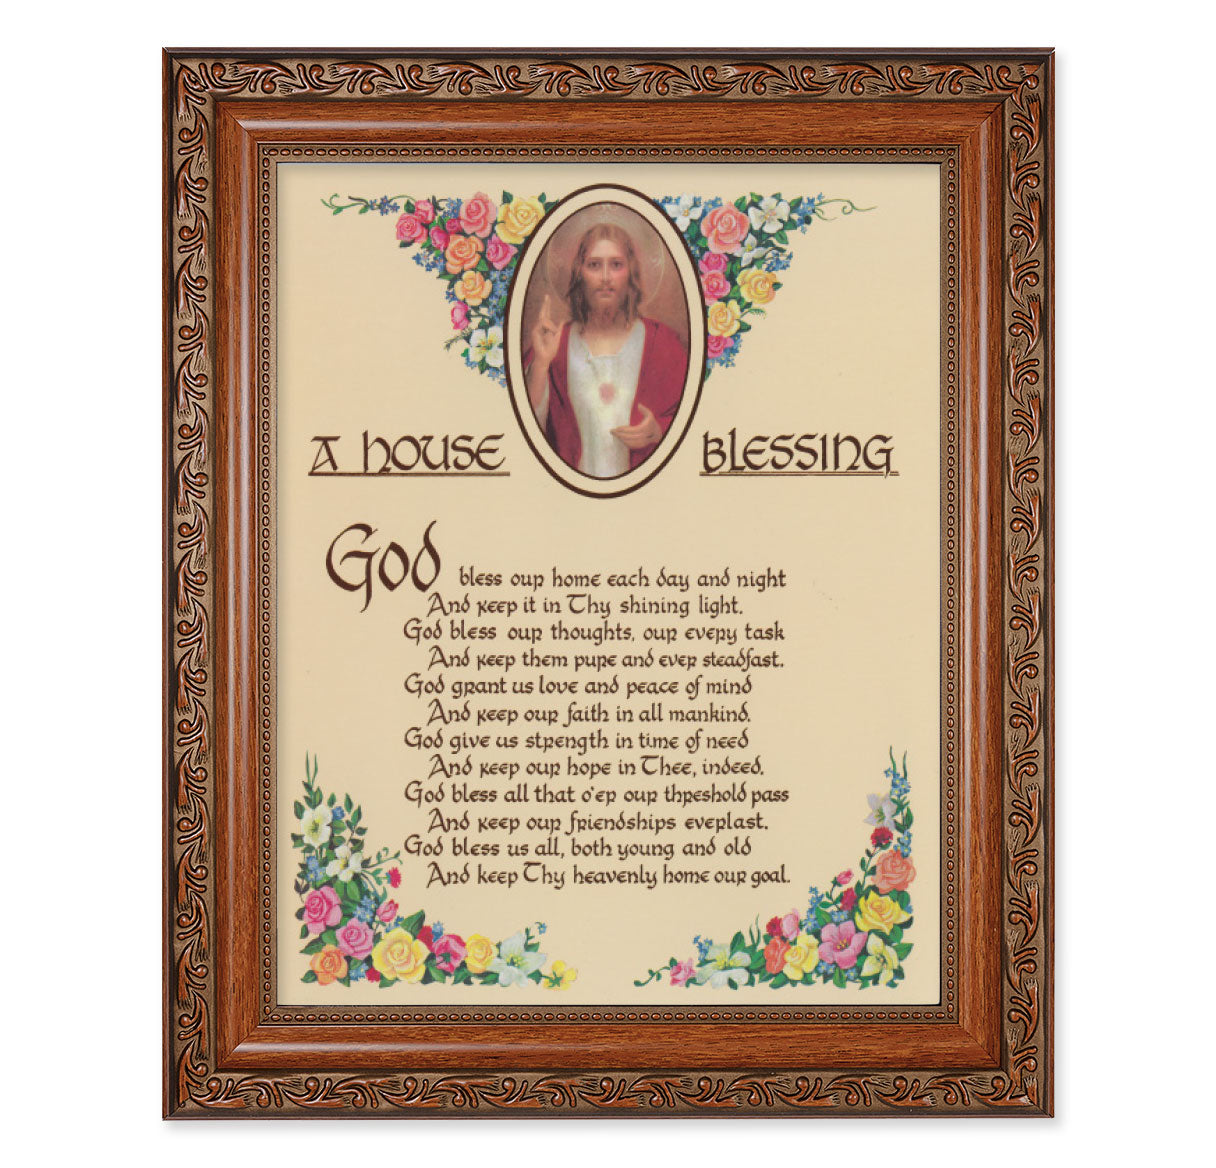 House Blessing Picture Framed Wall Art Decor, Large, Antiqued Dark Mahogany Finish Frame with Acanthus-Leaf Detailing